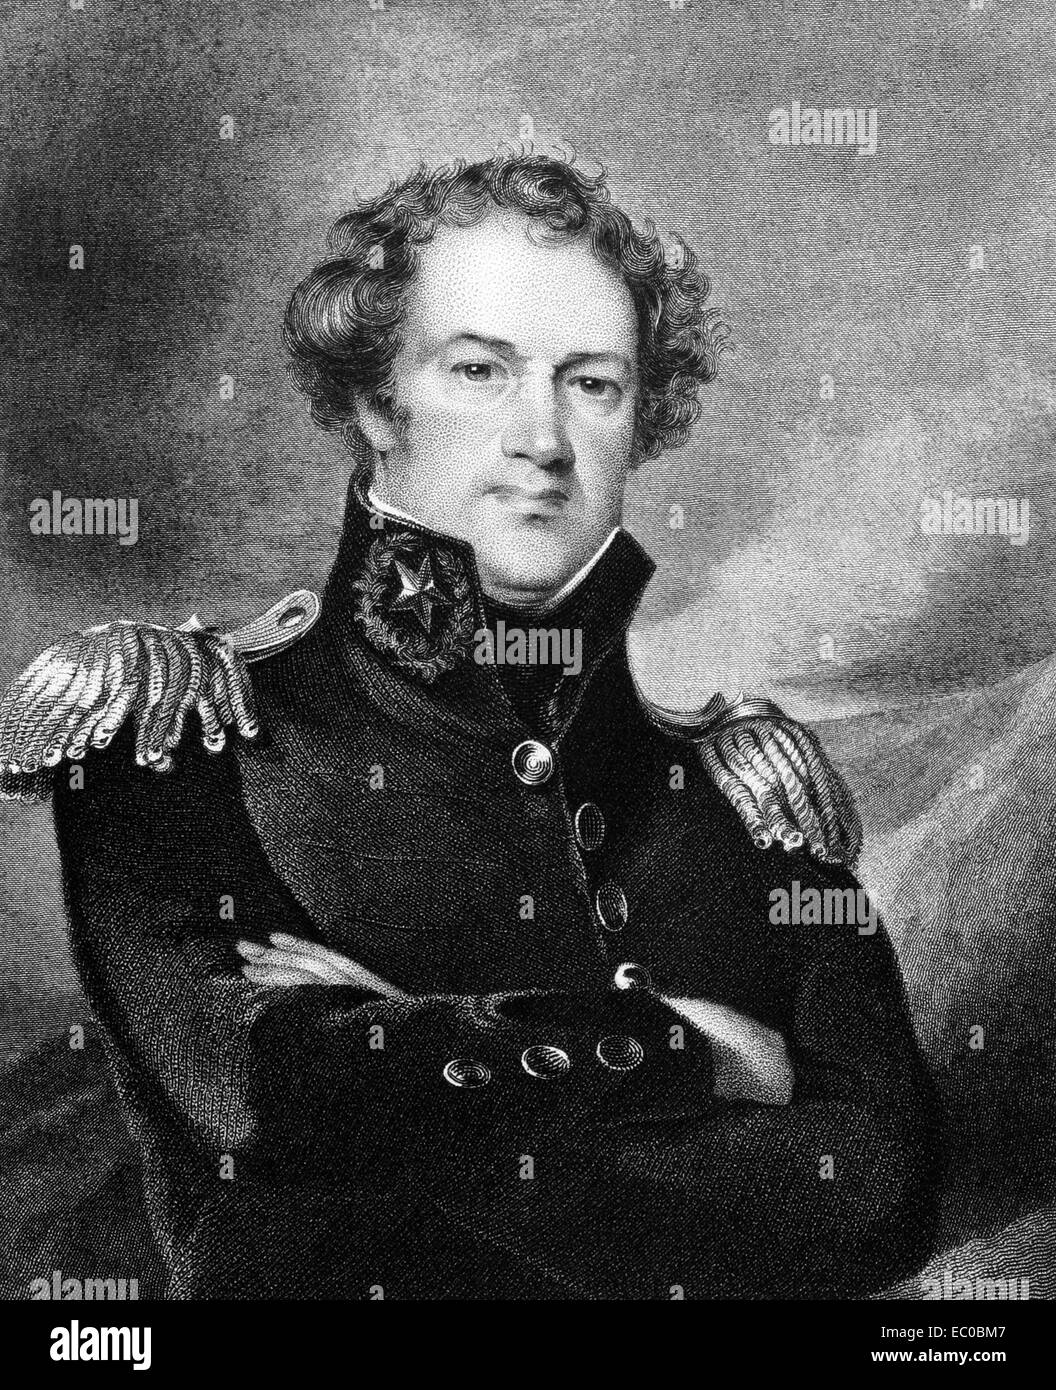 Alexander Macomb (1782-1841) on engraving from 1834. Commanding General of the United States Army during 1828-1841. Stock Photo